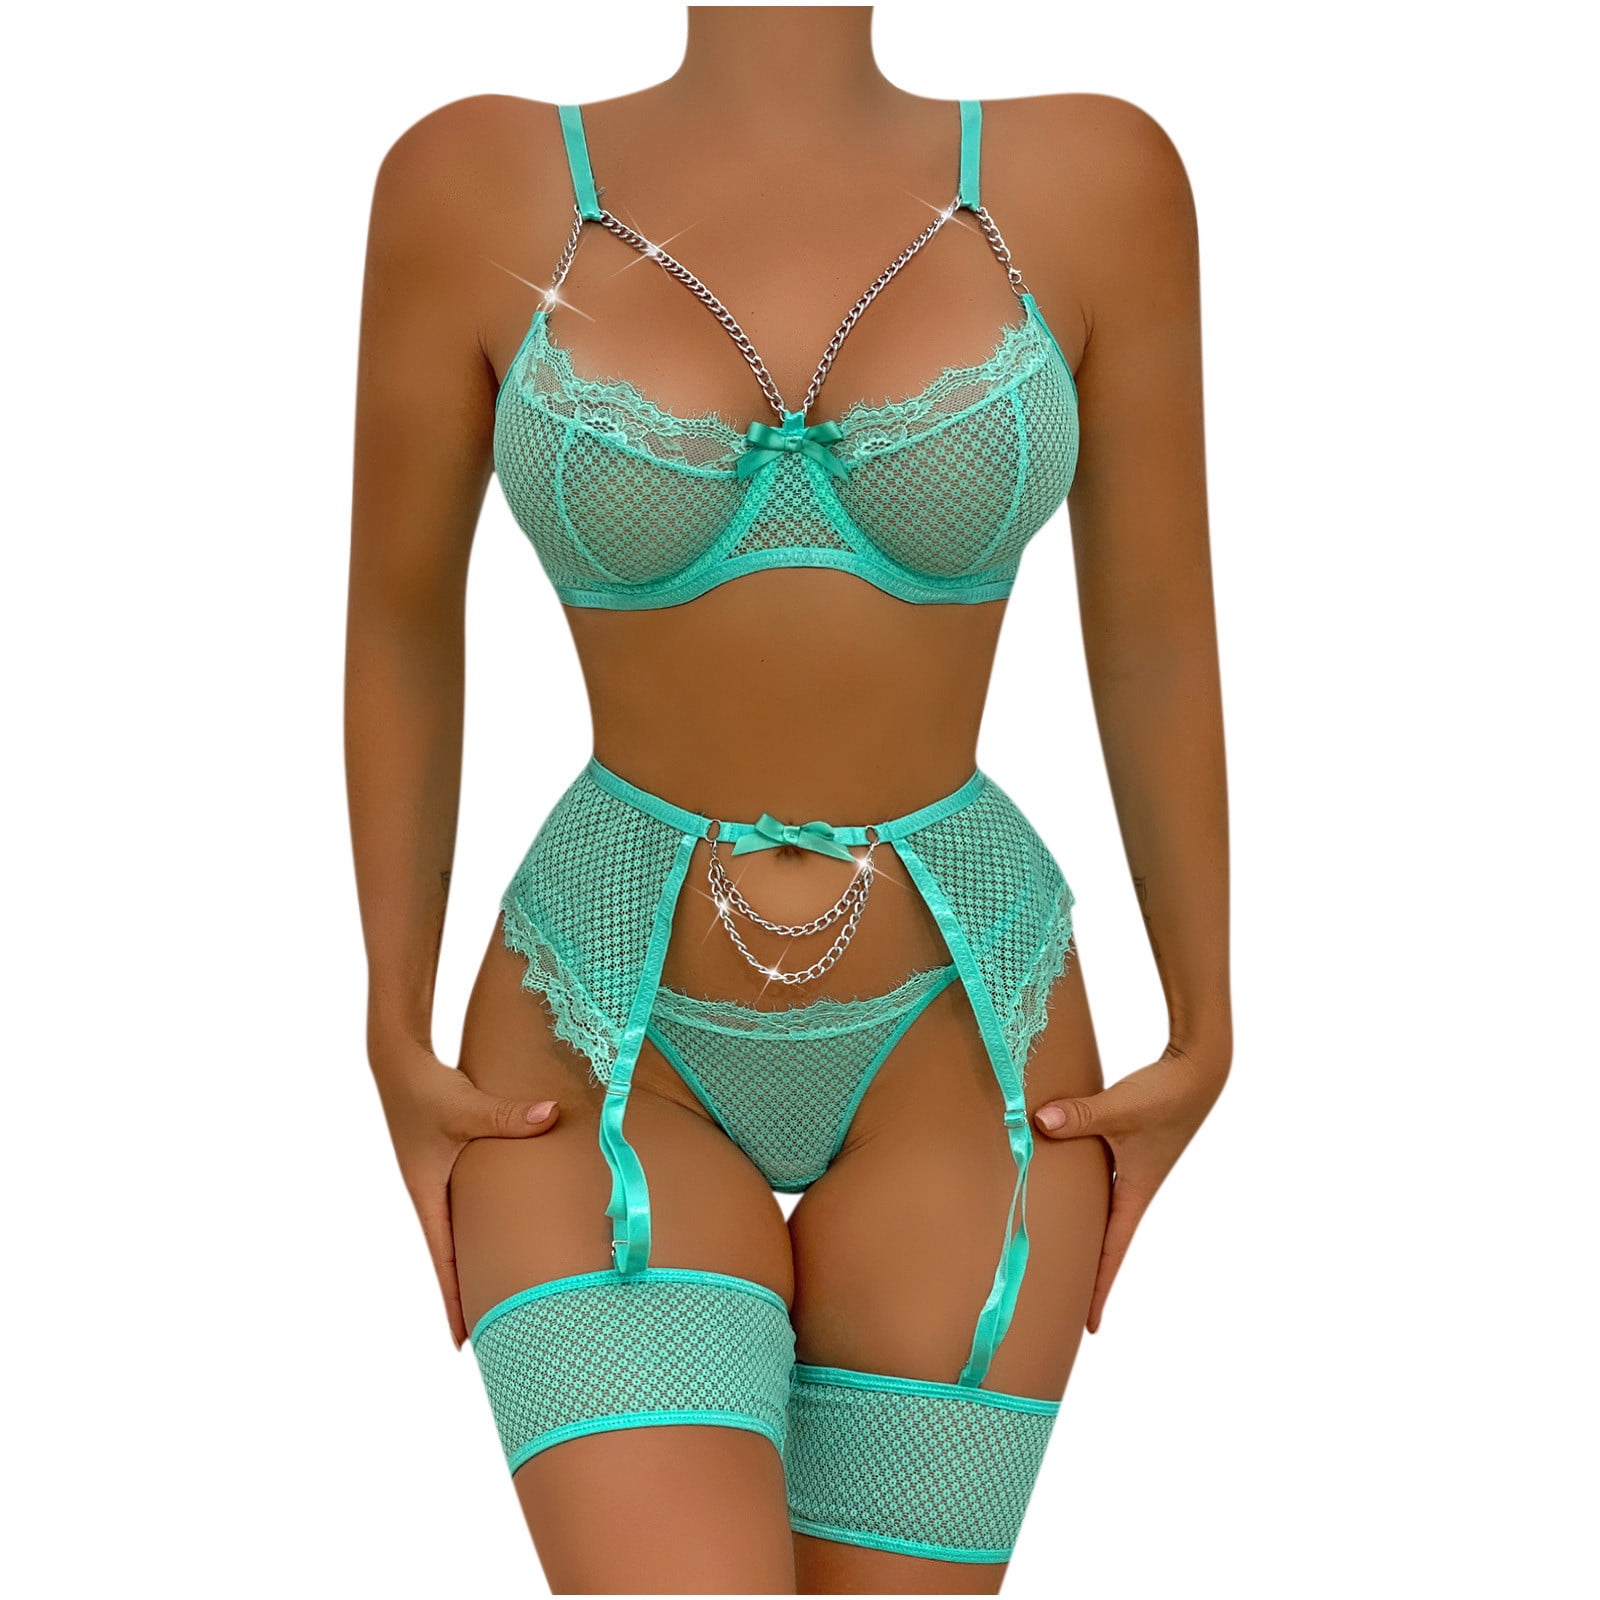 Sai enterprises - Whatsapp -> +919452915603 Checkout this hot & latest  Lingerie Sets Trendy Hosiery Lingerie Set Fabric: Hosiery Sleeves: Sleeves  Are Not Included Size:30B: Cup Size - Underbust - 25 in